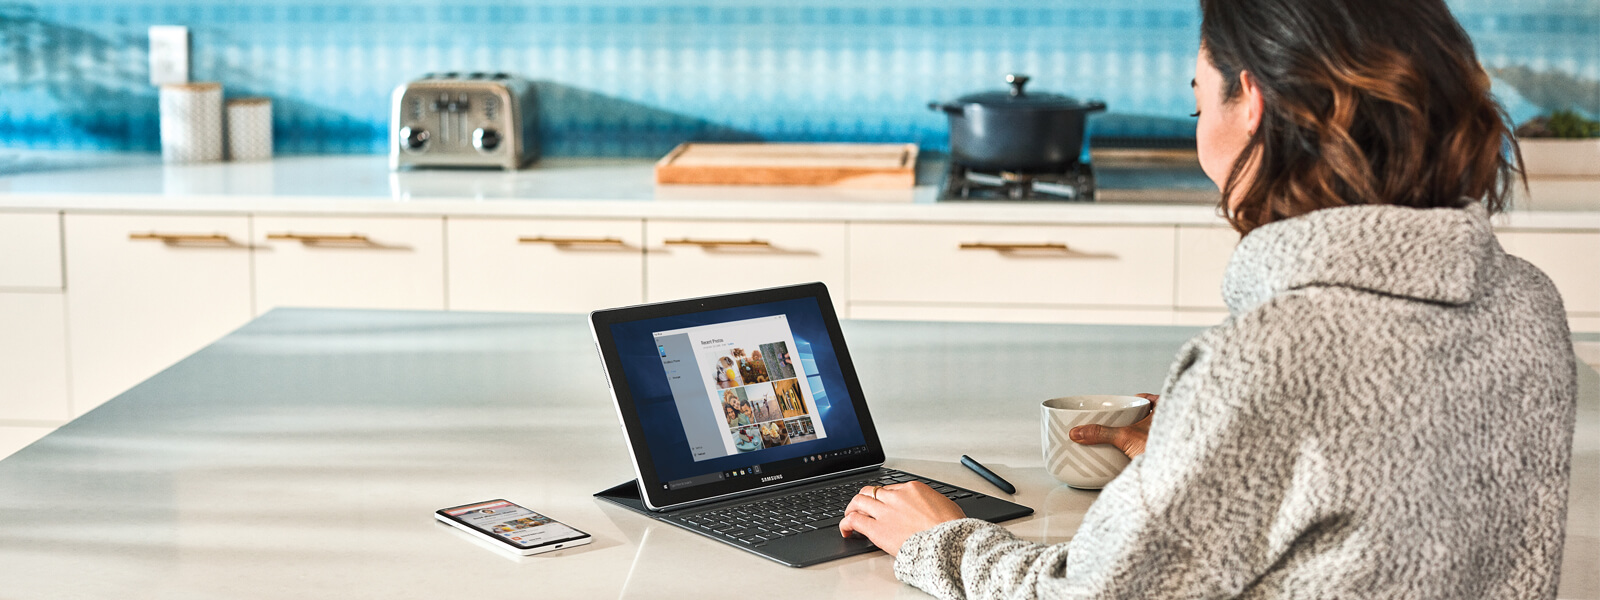 Microsoft Windows 10 Personal Tips and Tricks 